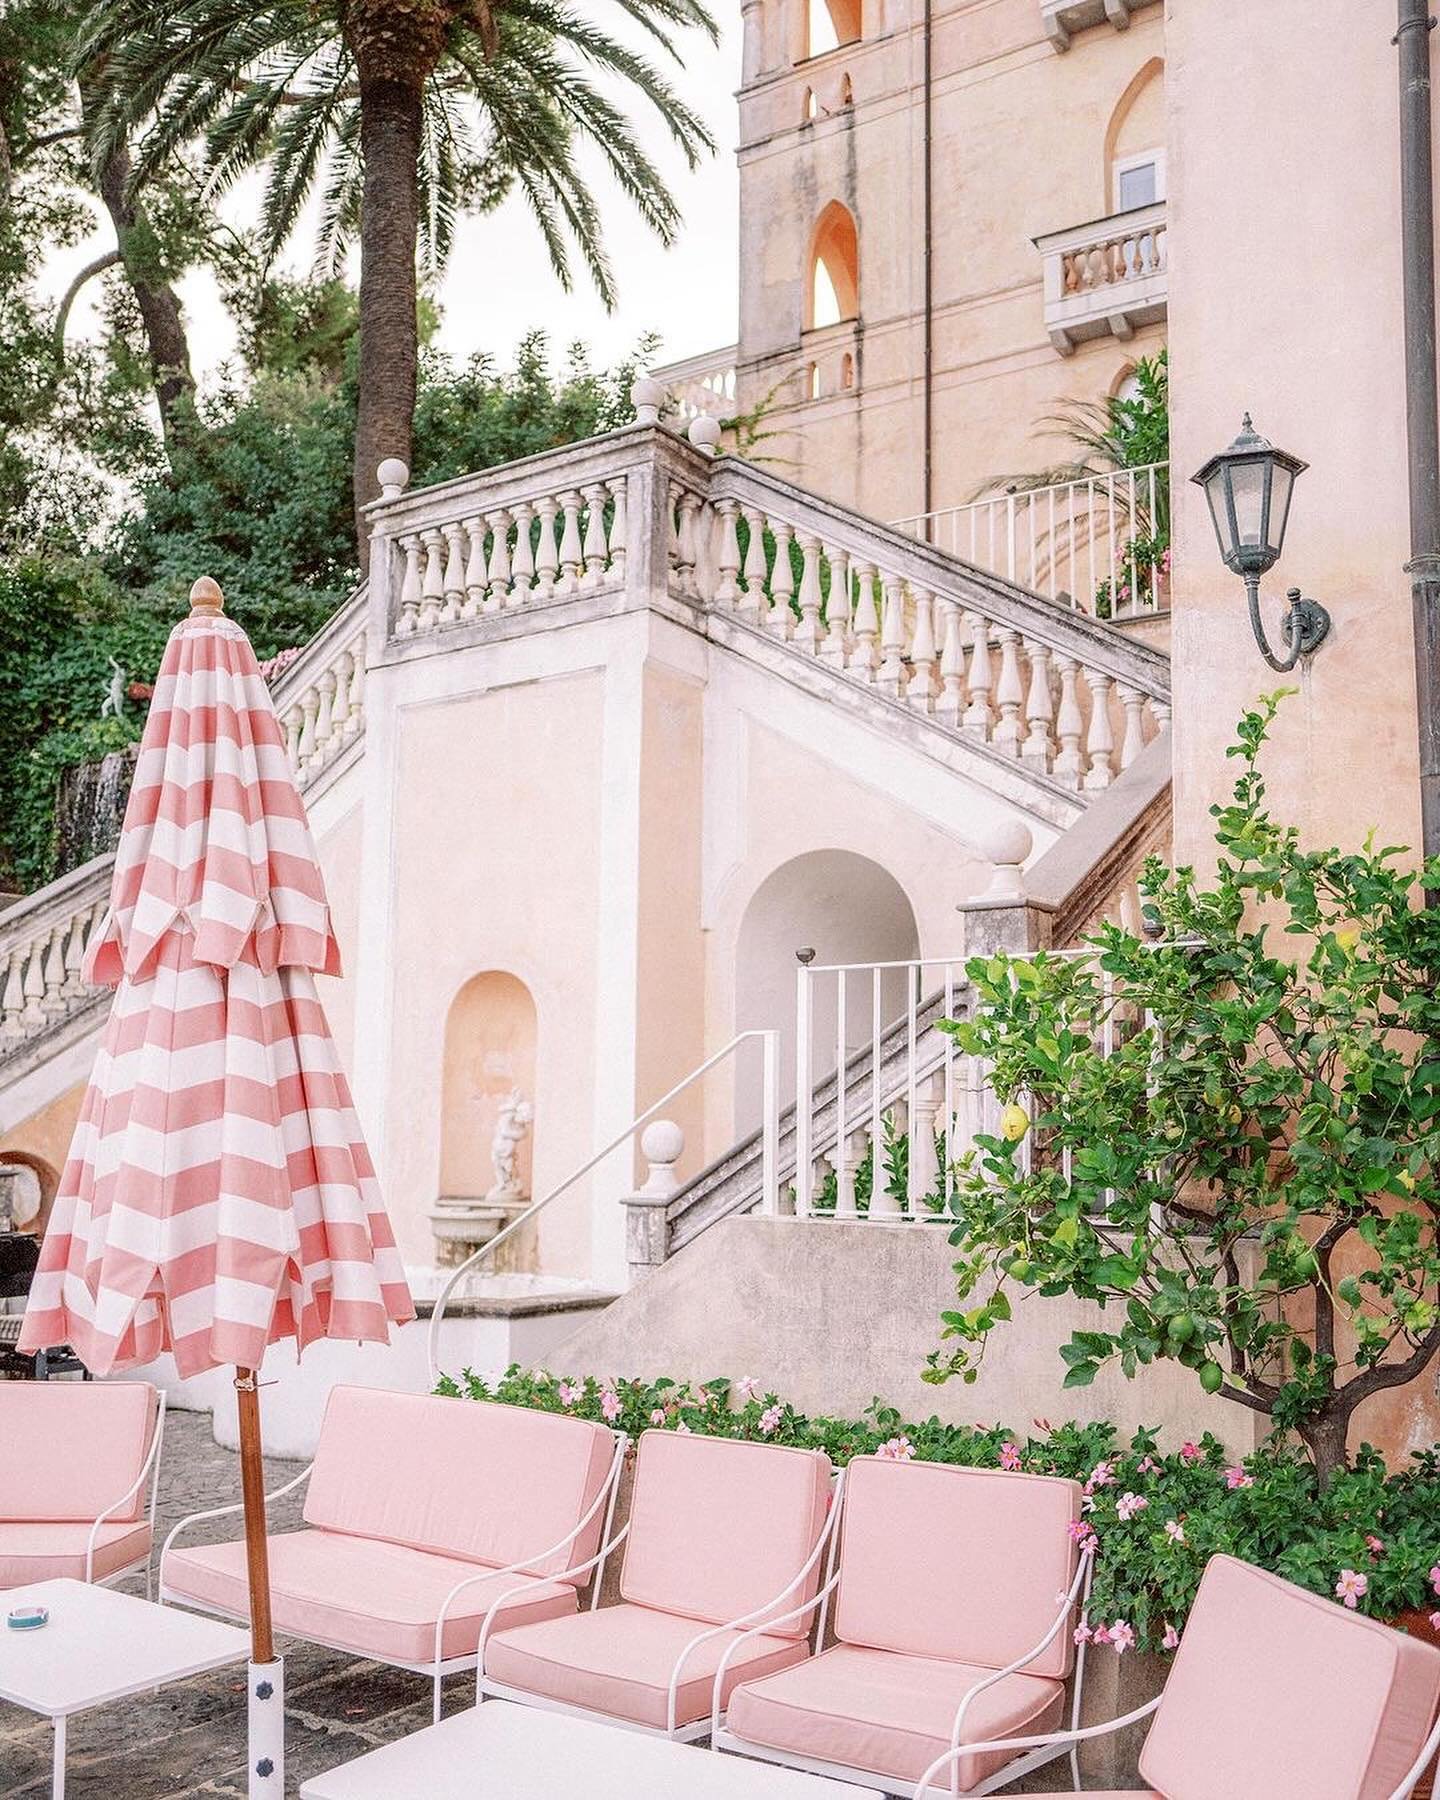 With summer on the horizon we&rsquo;re deep in preparation for destination weddings and already looking ahead to next year. The @palazzoavino in Ravello on the Amalfi Coast has already stolen our hearts as a special potential spot.

Photography: @jil